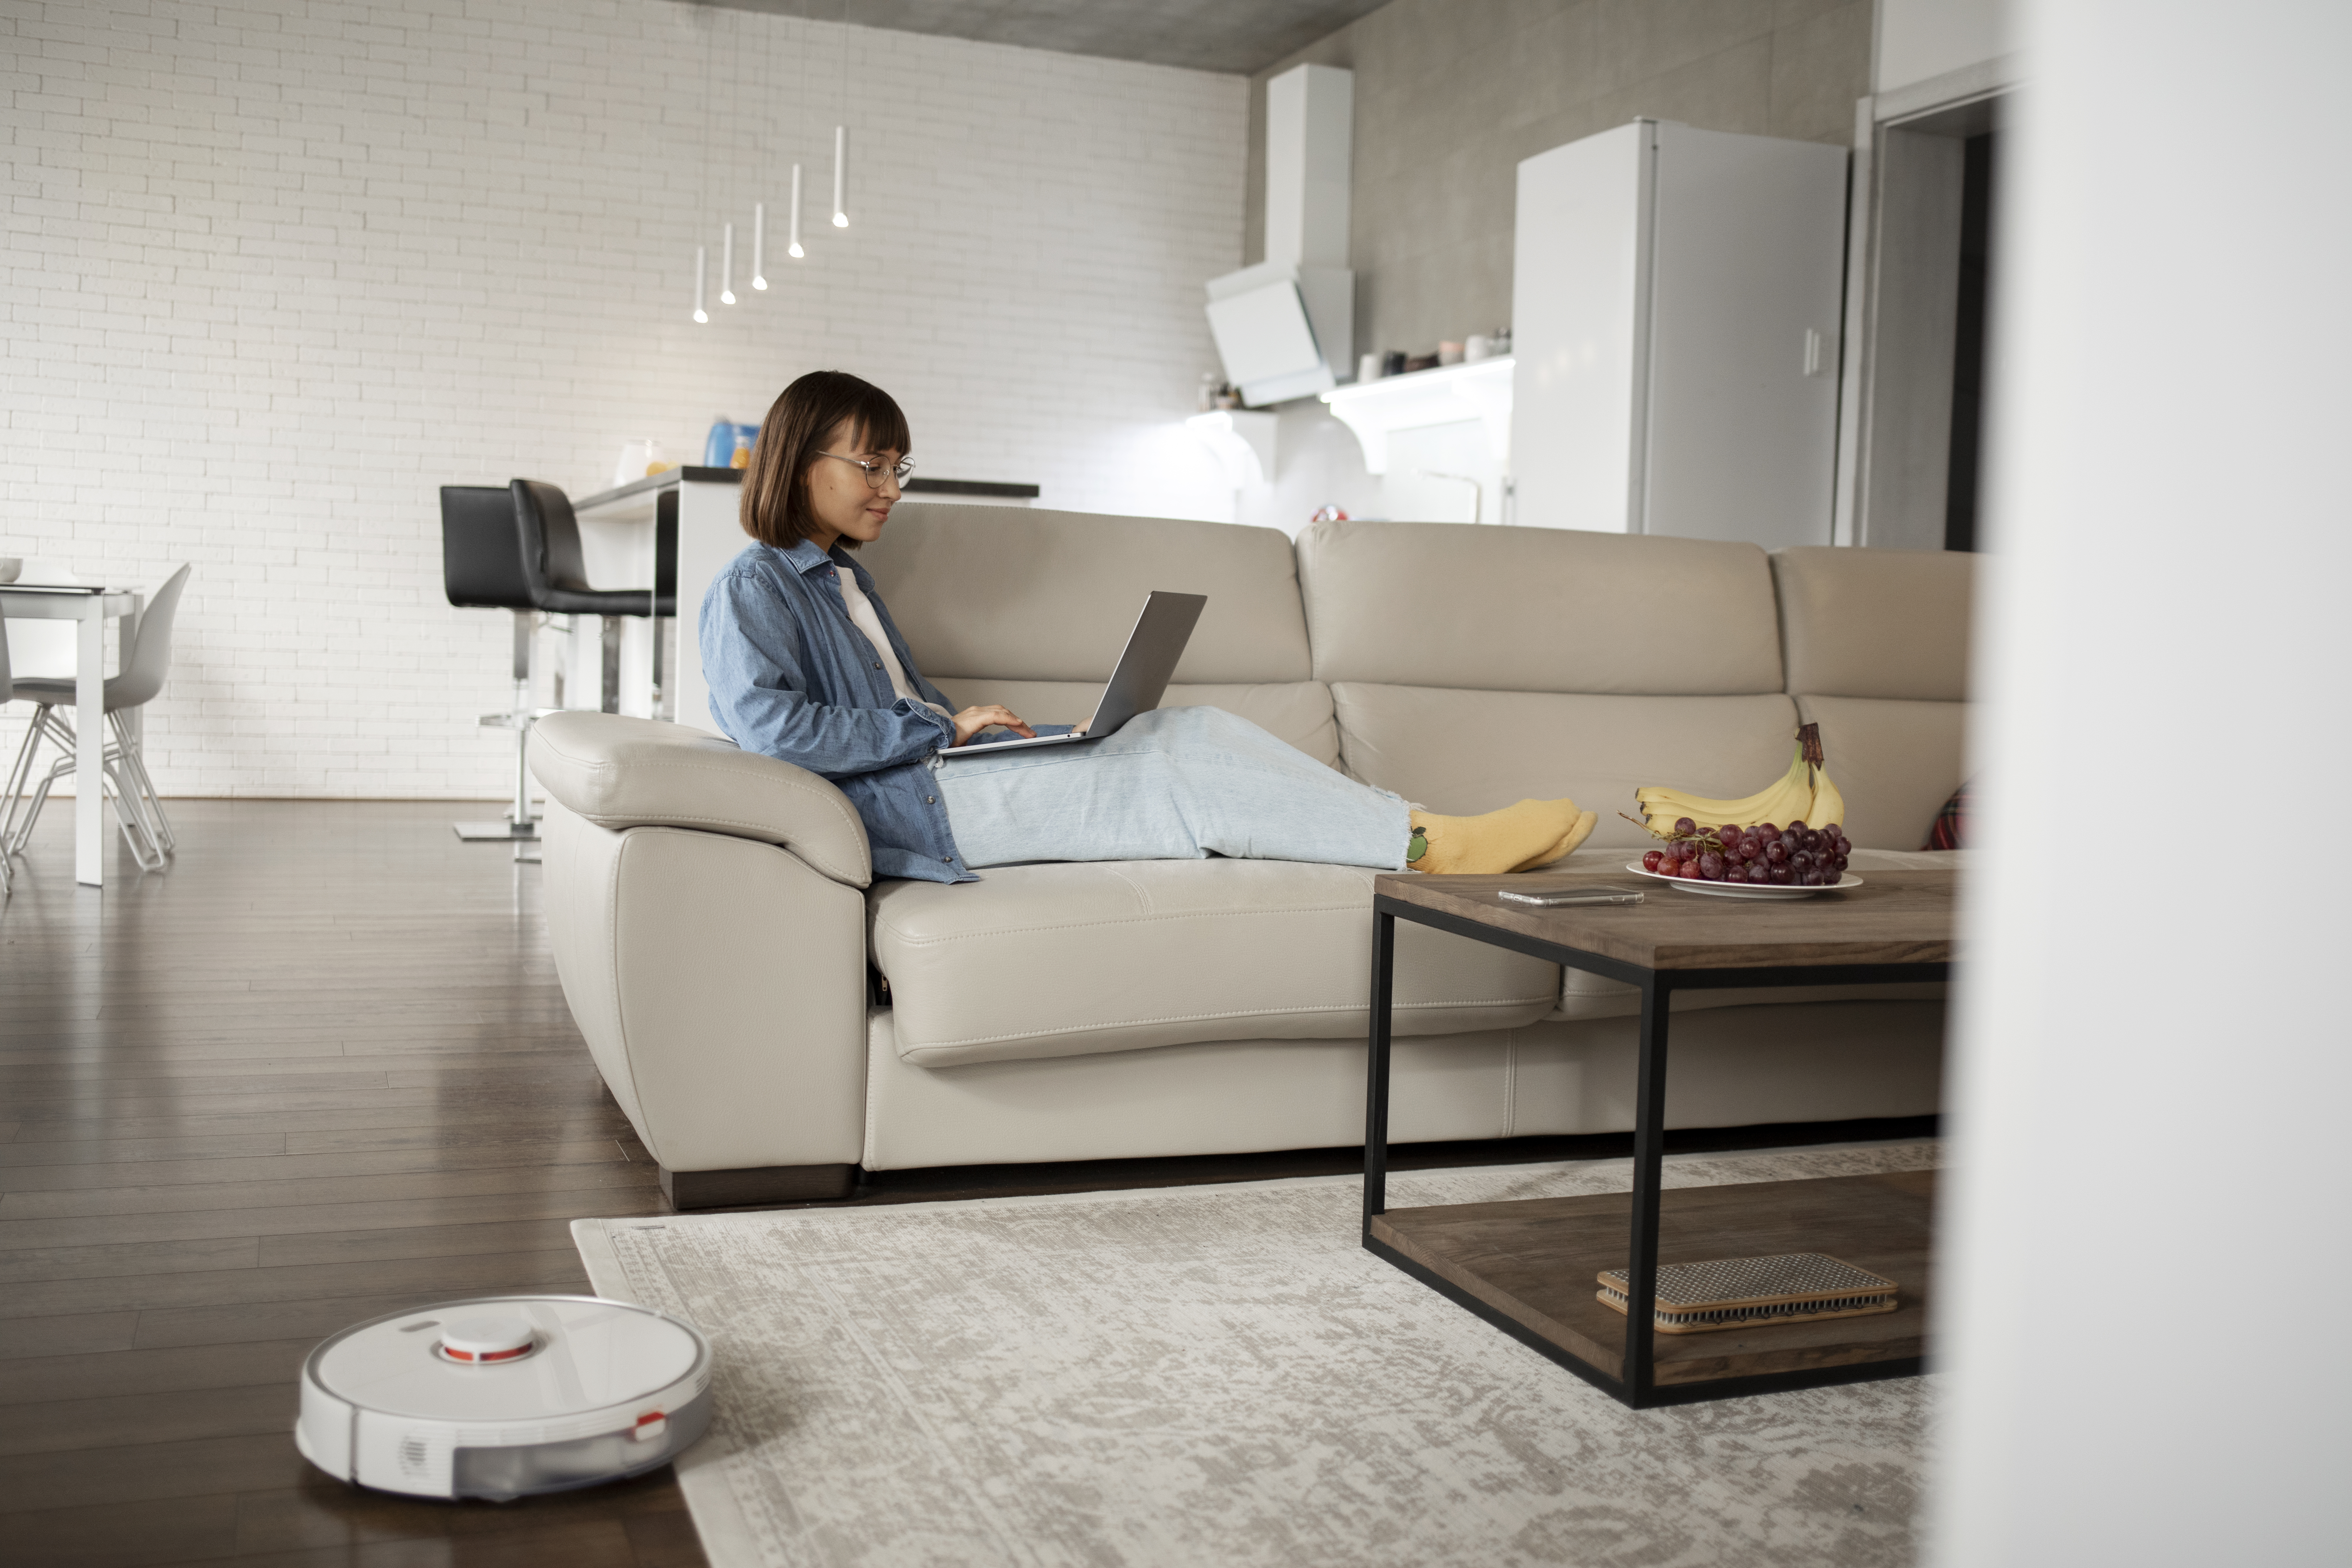 young-woman-using-home-technology